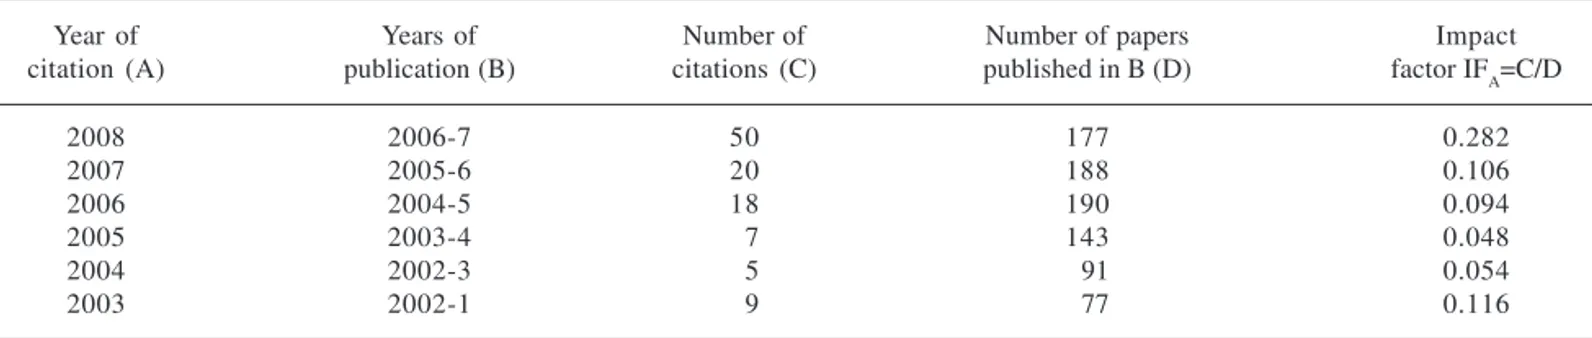 Table 1 displays an estimate of the impact factors based on ISI data for Acta Botanica Brasilica